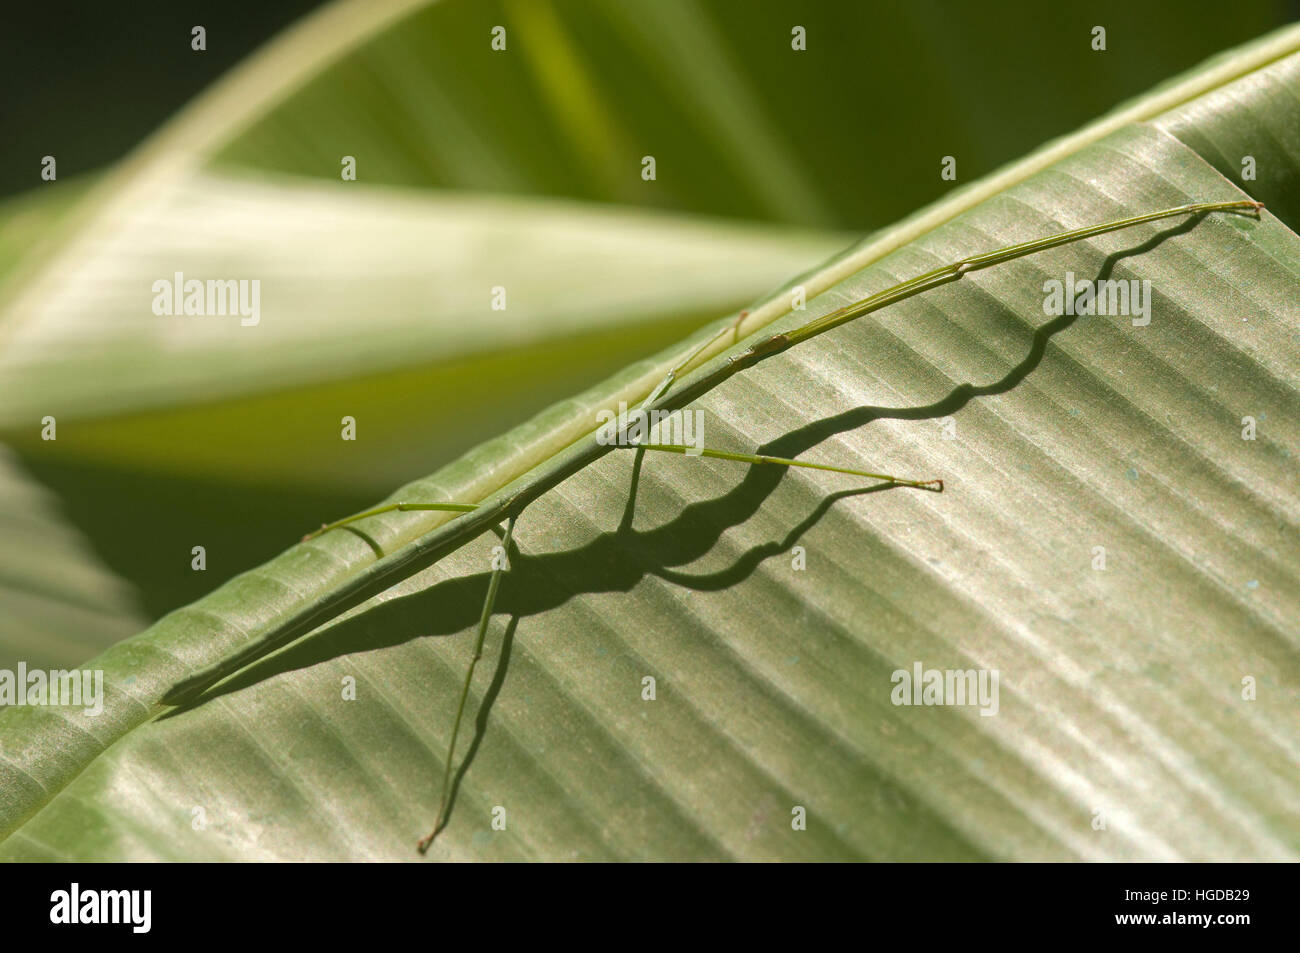 Stick insect, Baculum thaii, female, Thailand, Stock Photo